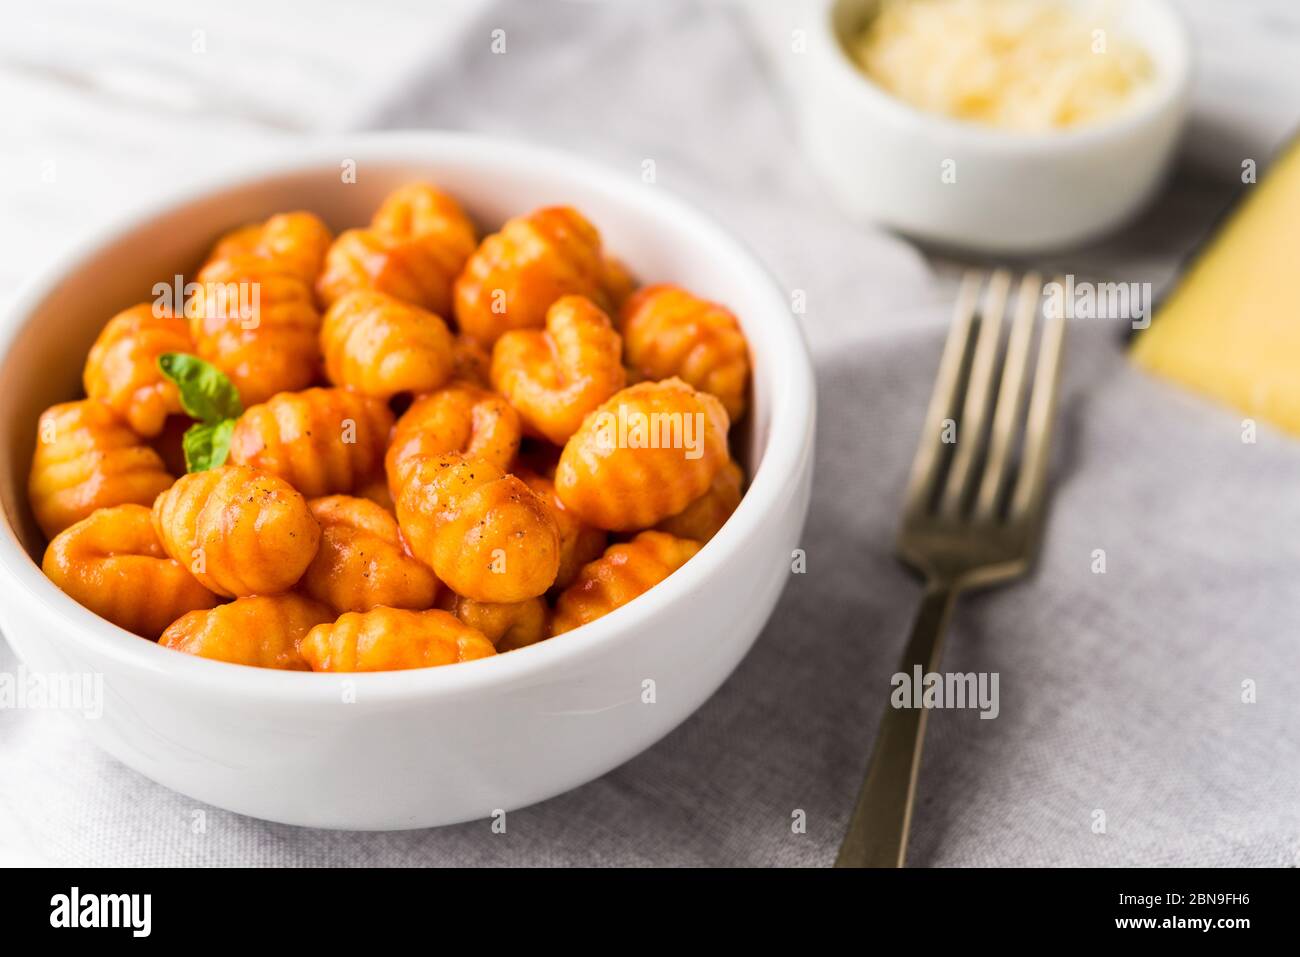 Gnocchi with tomato sauce, basil, and cheese, traditional Italian pasta food. Stock Photo